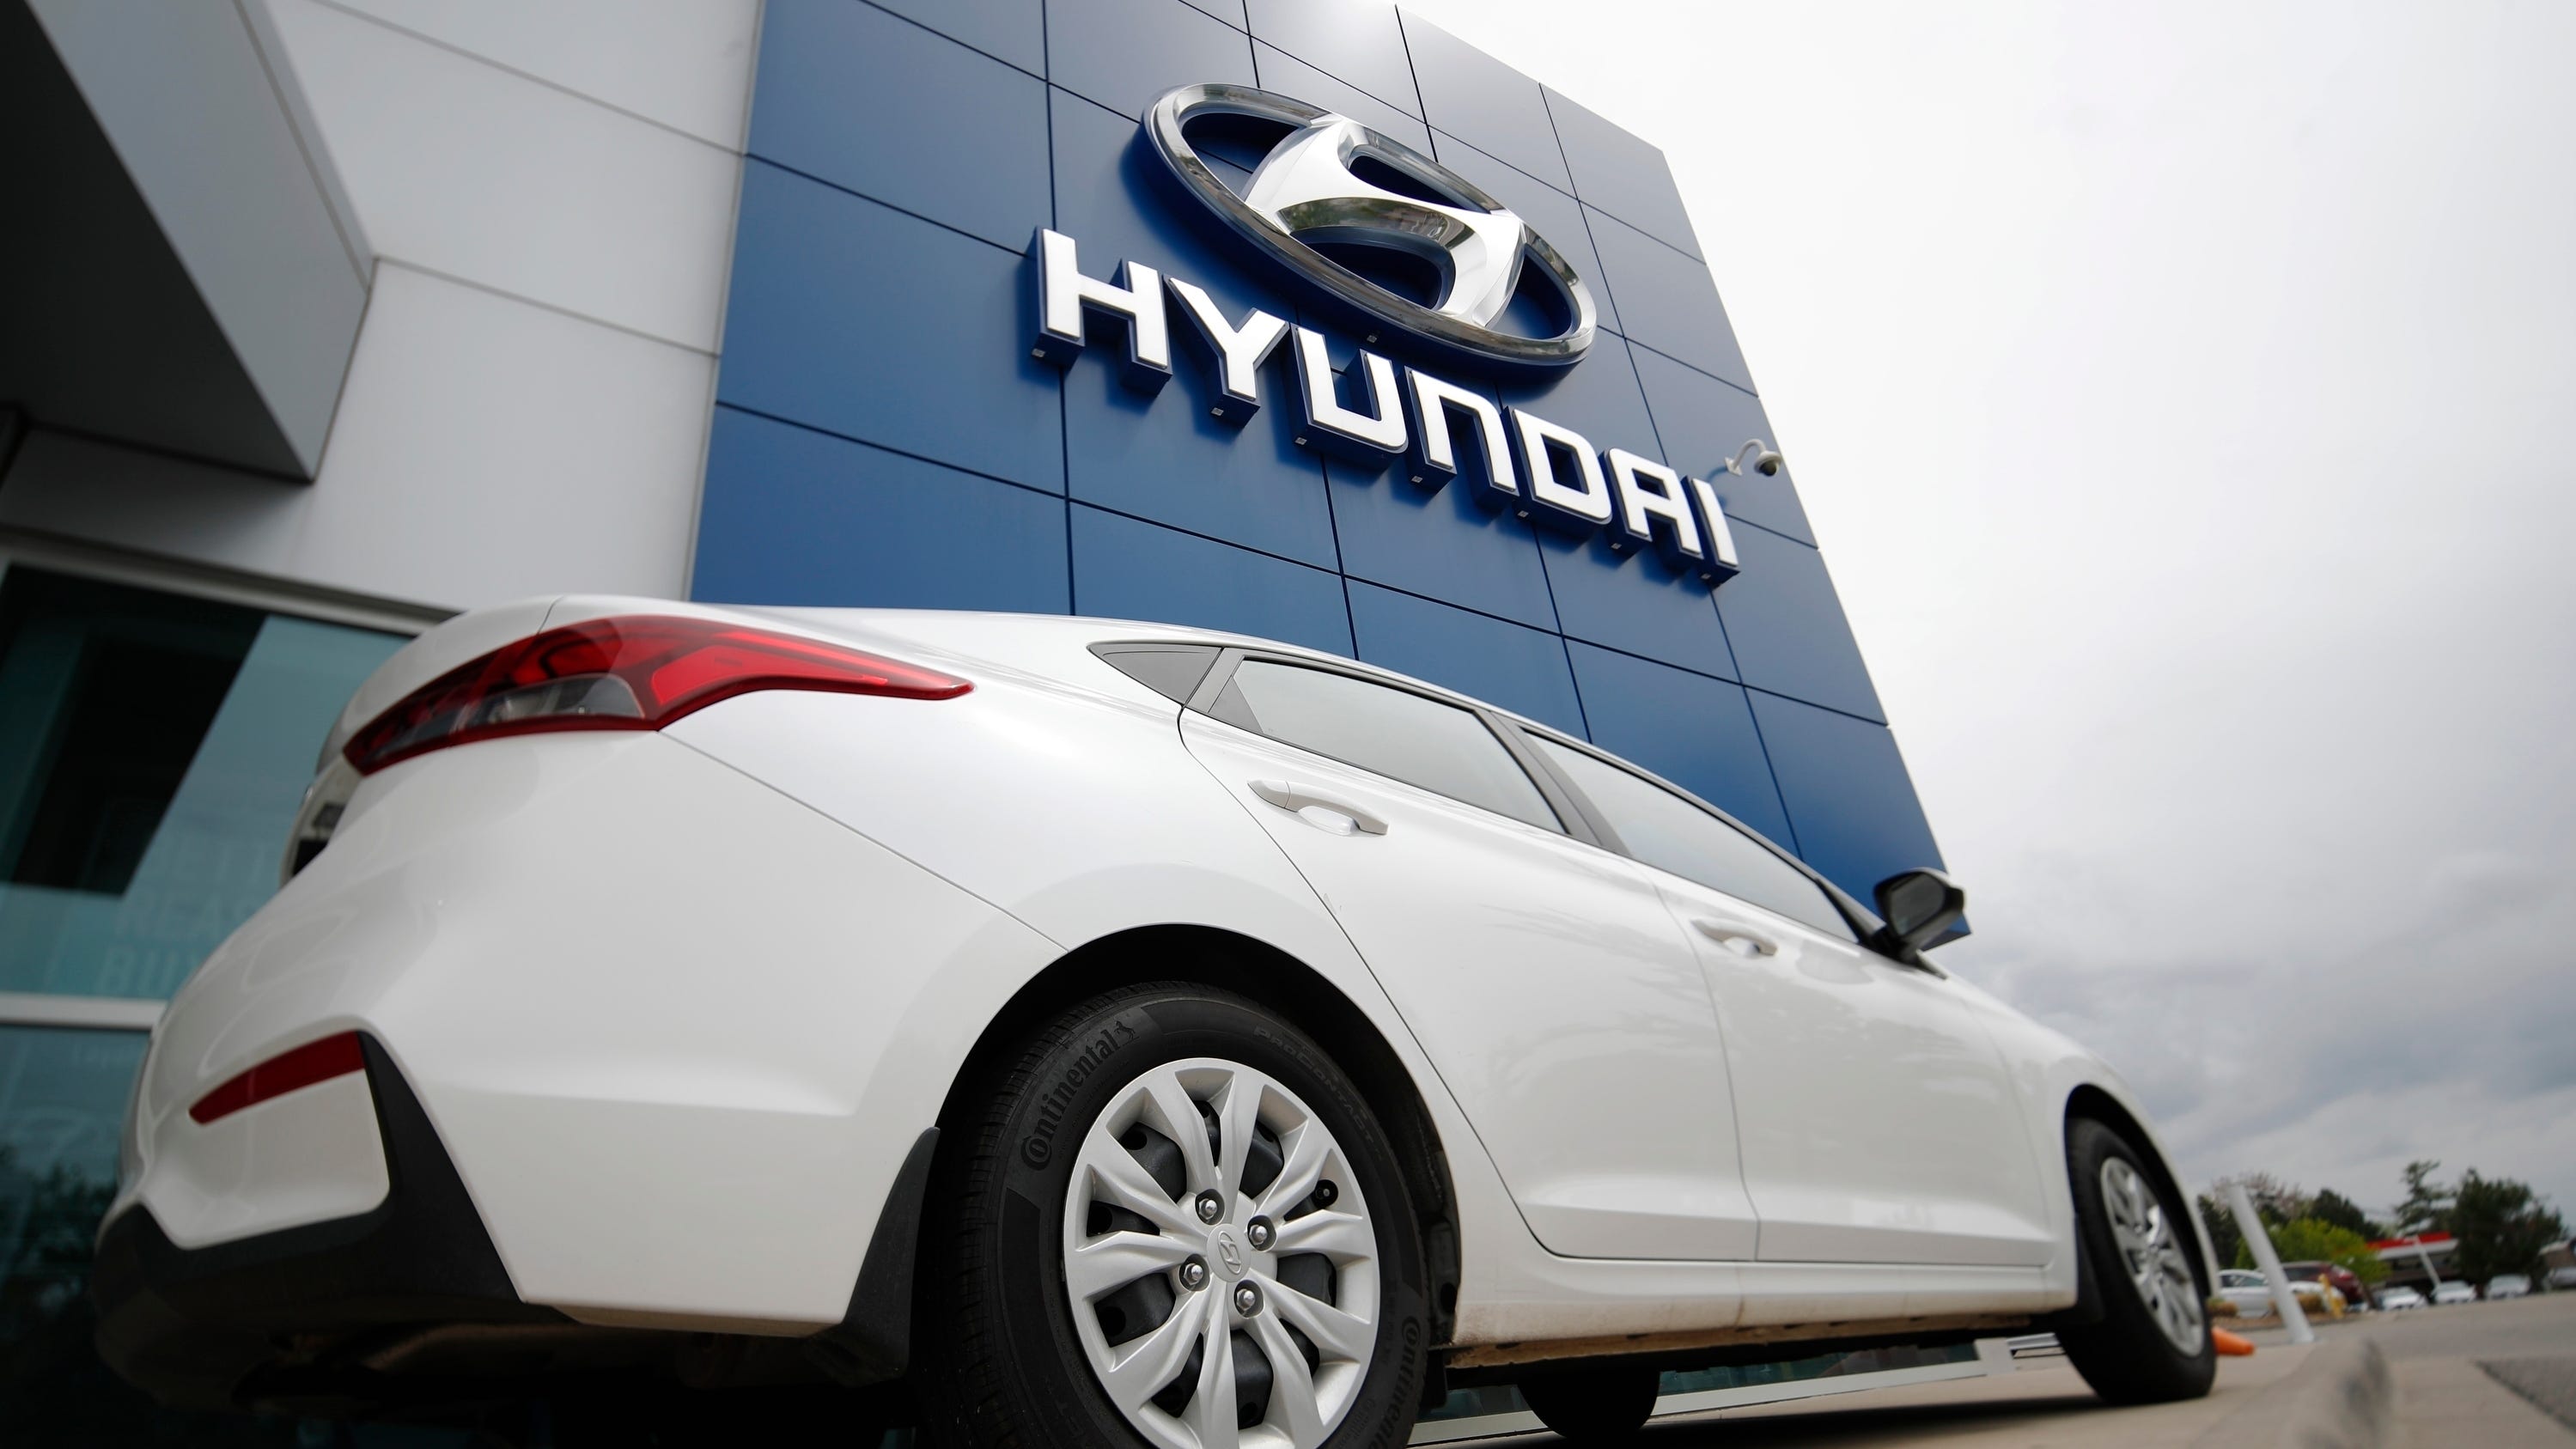 Over 807,000 cars from Hyundai, Kia, Mercedes-Benz and GM under recall: Check recalls here